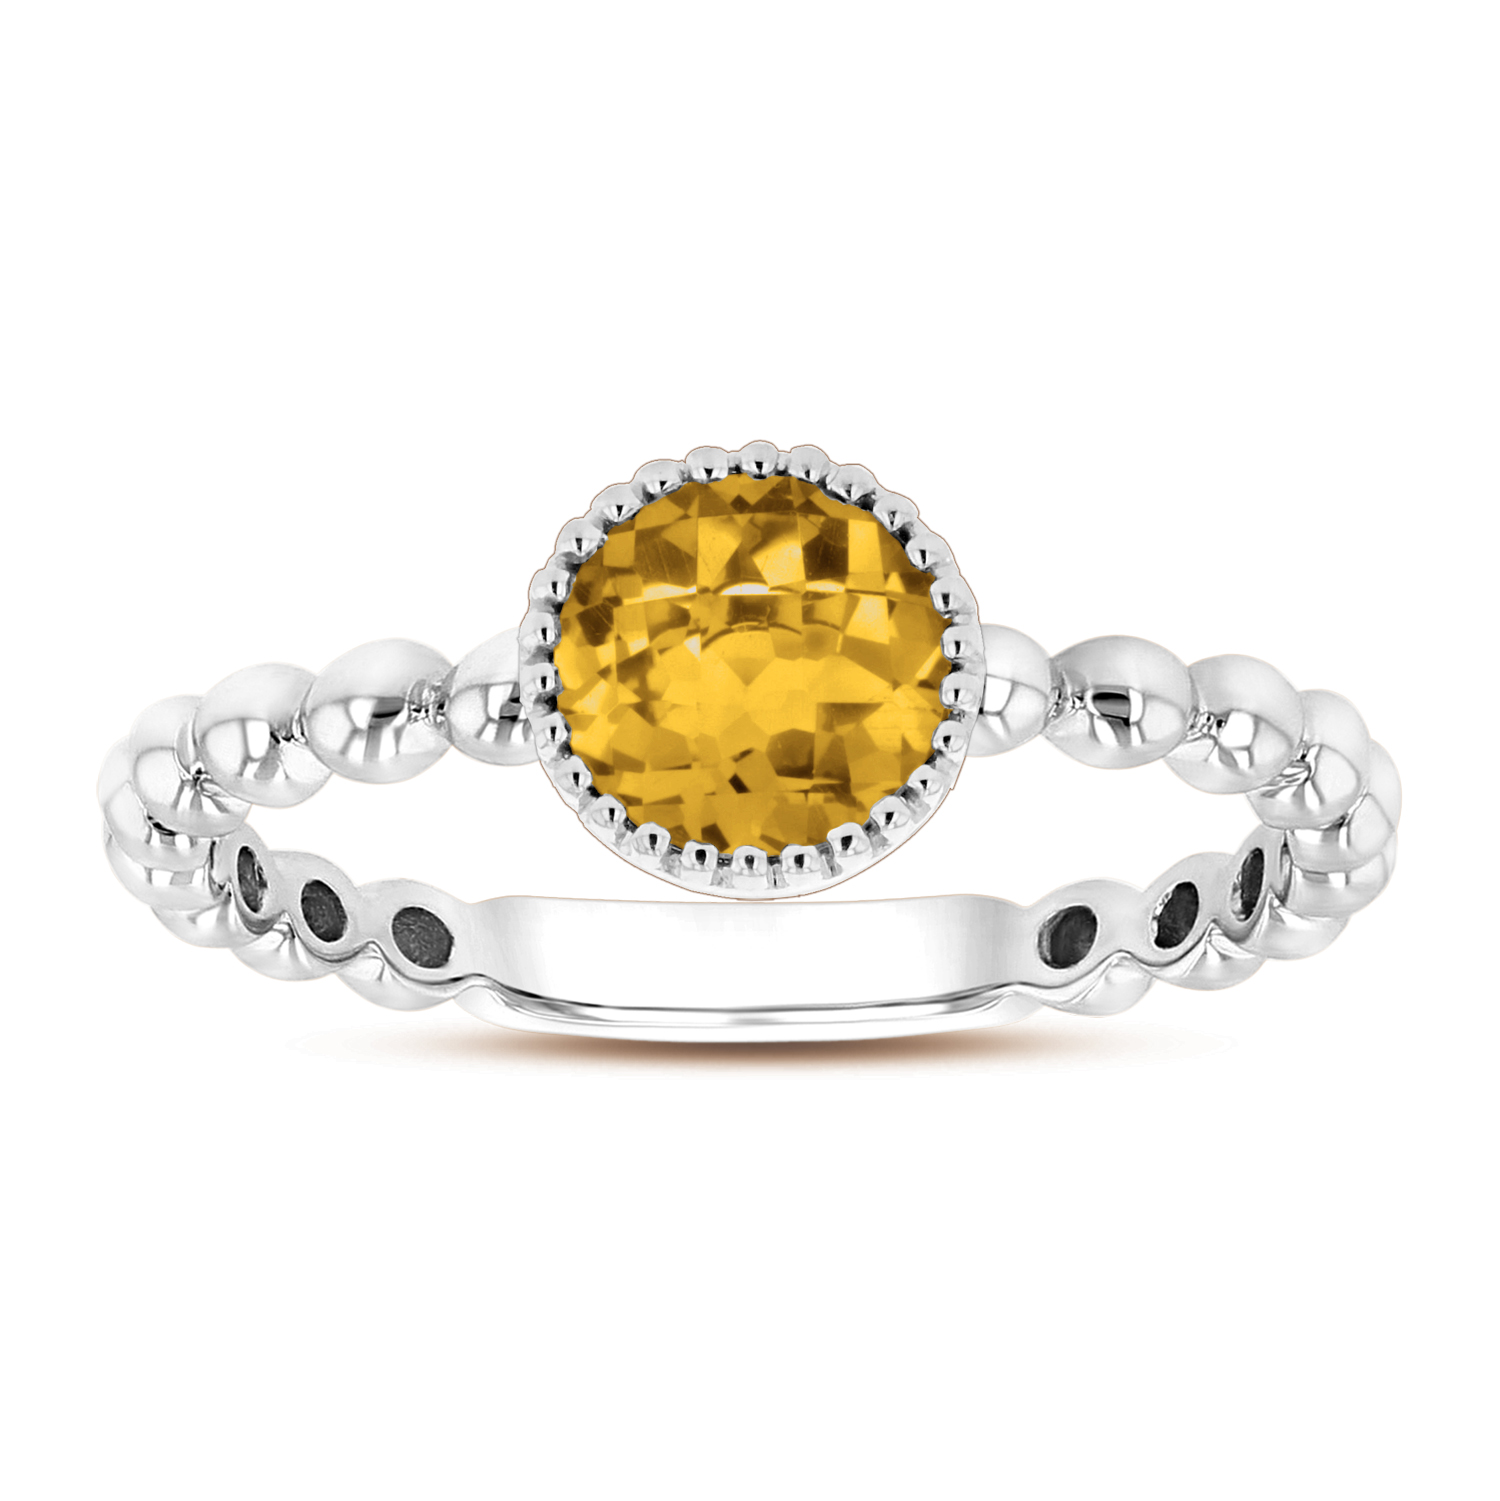 View 6mm Round Citrine Ring in 14k Gold